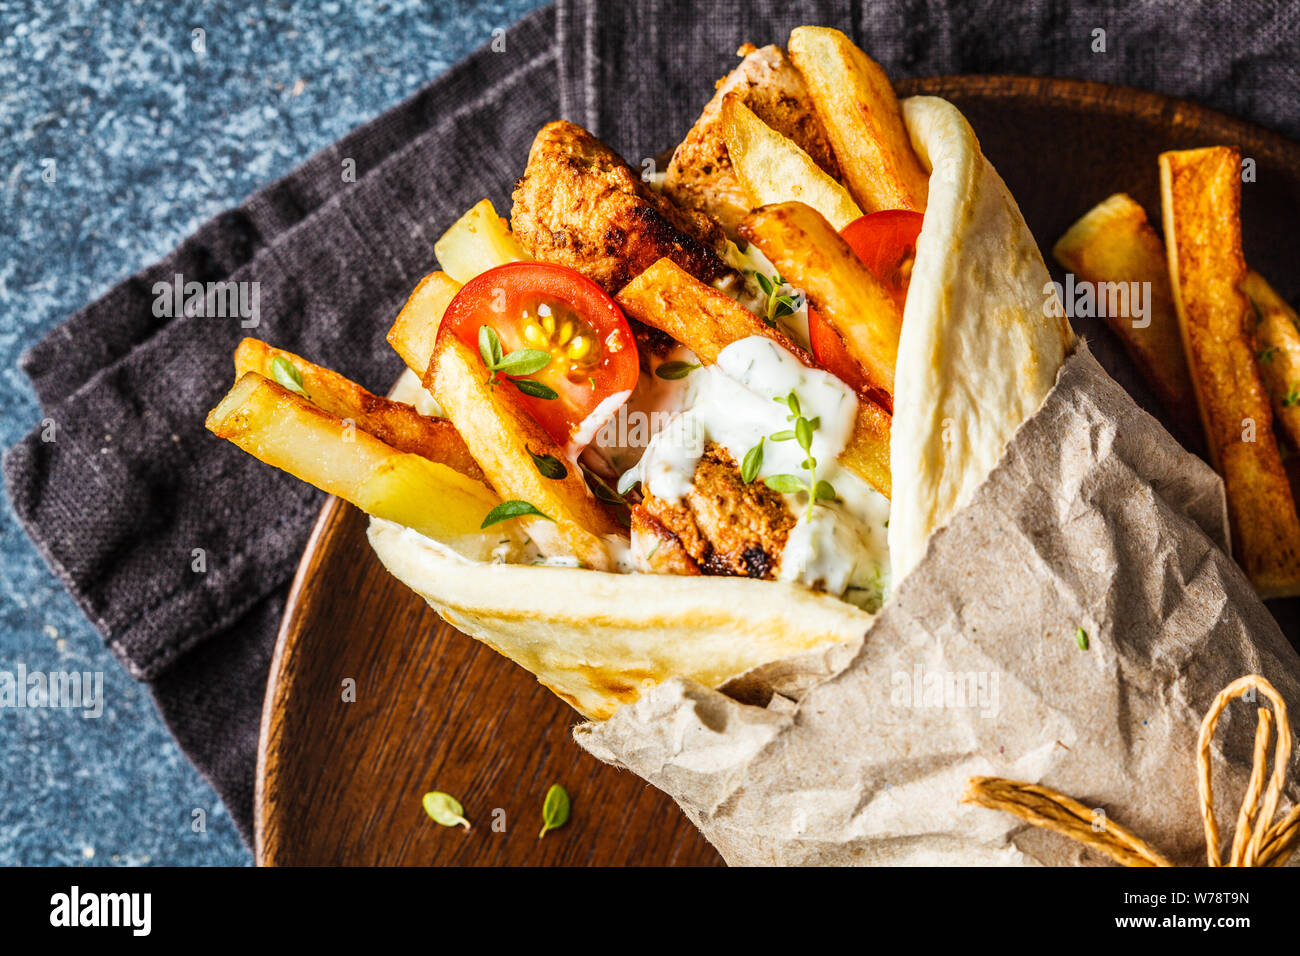 Gyros High Resolution Stock Photography and Images - Alamy